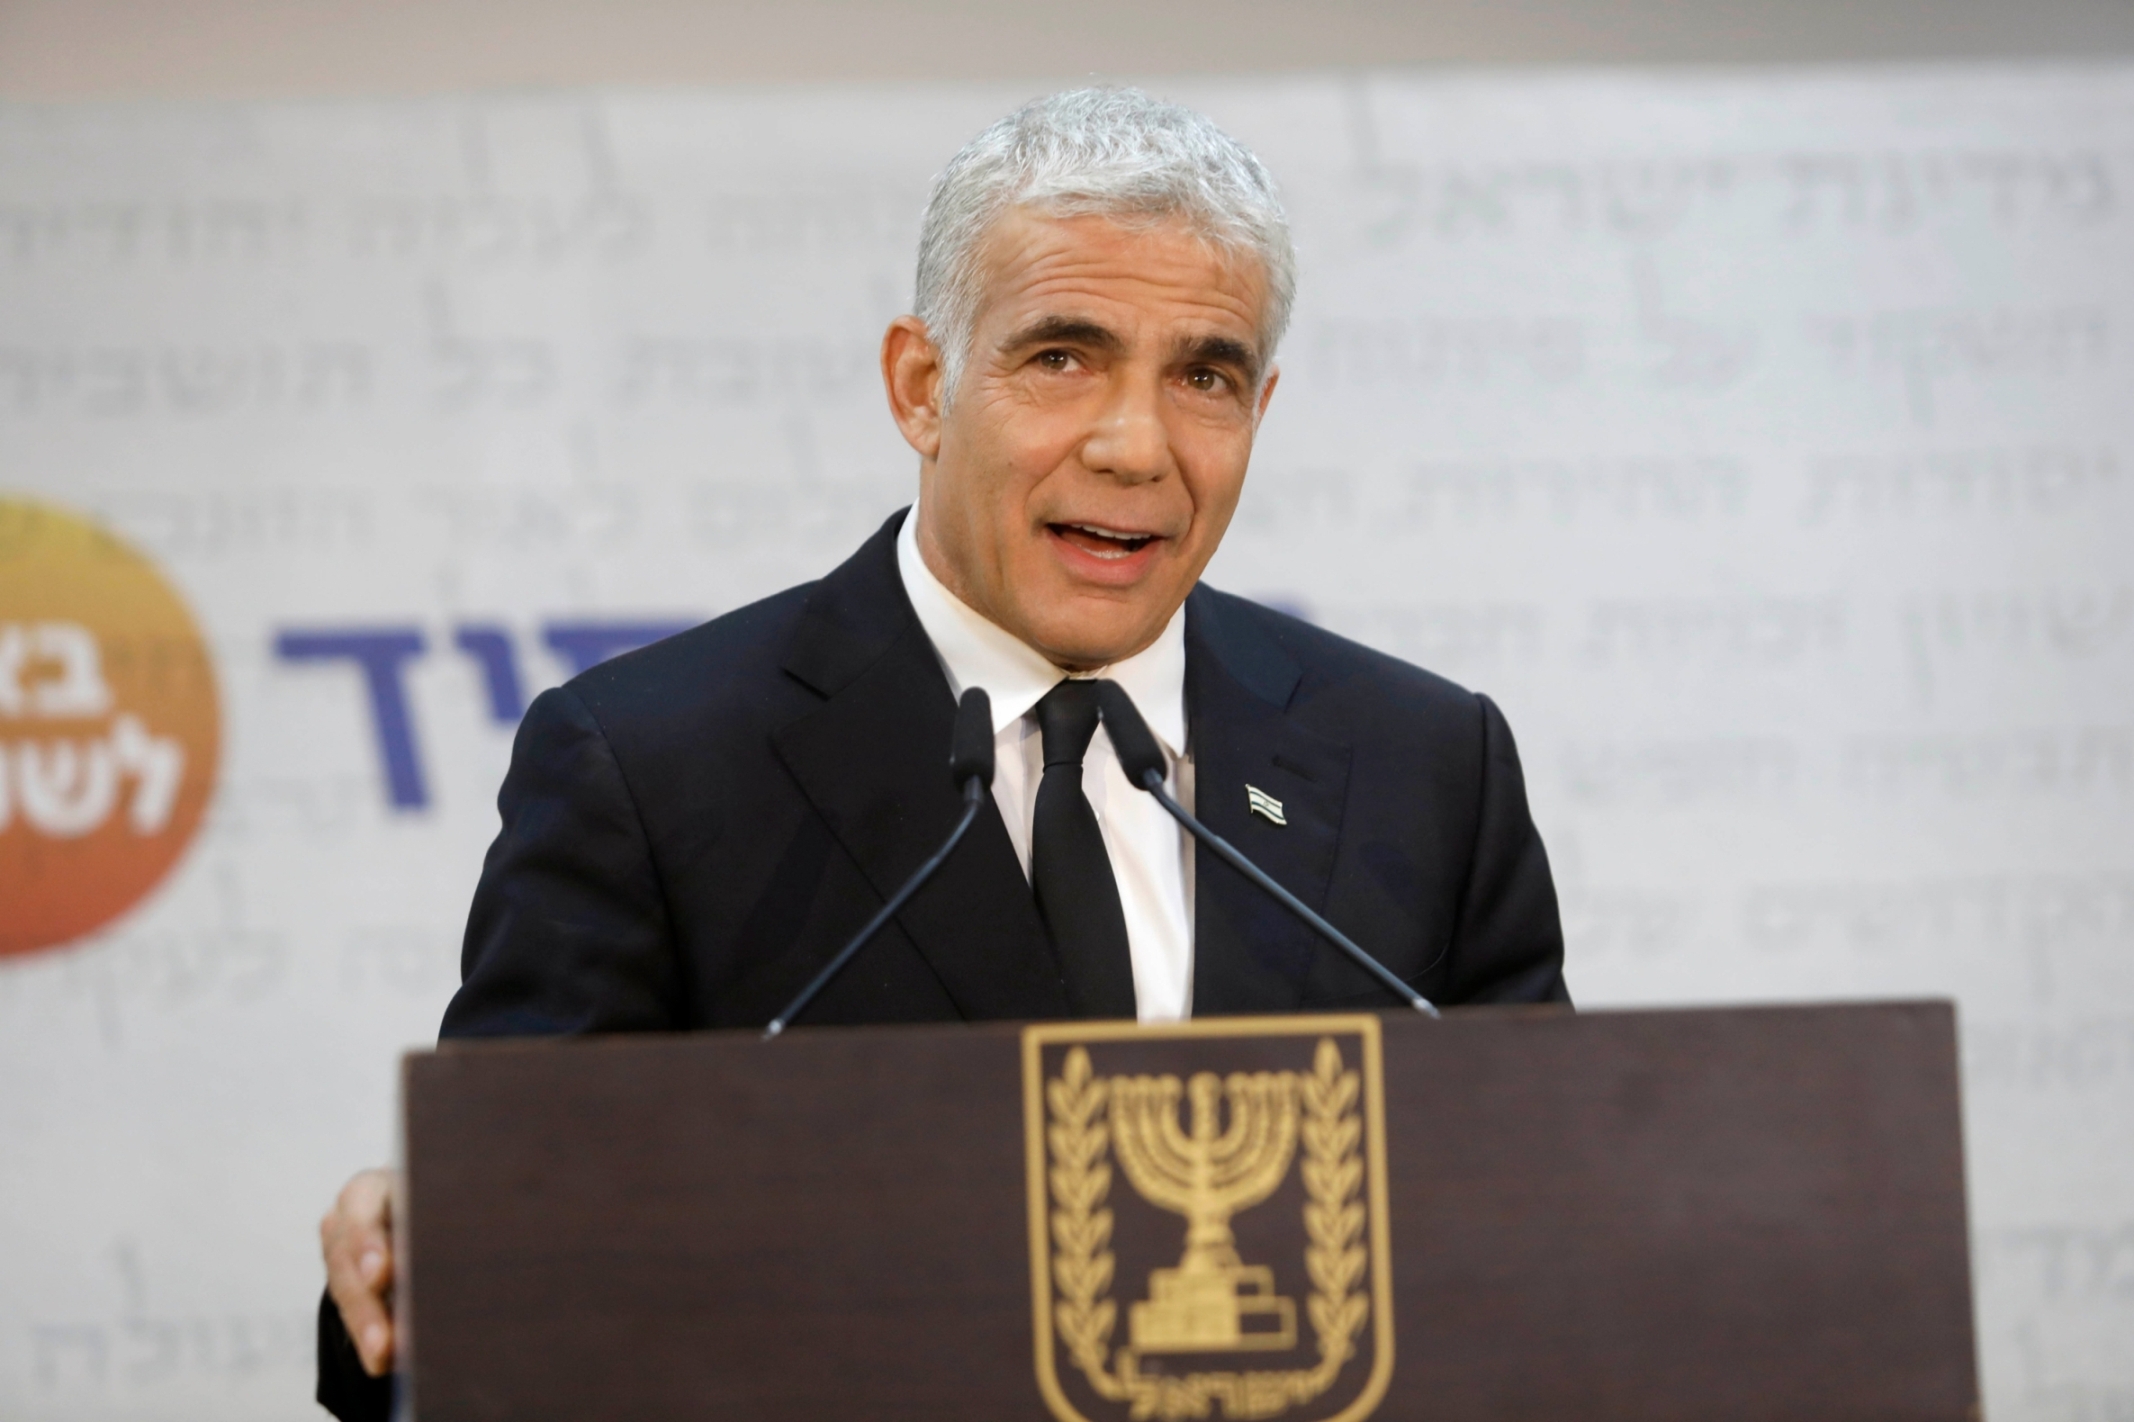 Yair Lapid the head of the Yesh Atid party speaks during a press conference in the Mediterranean coastal city of Tel Aviv on March 6, 2021.